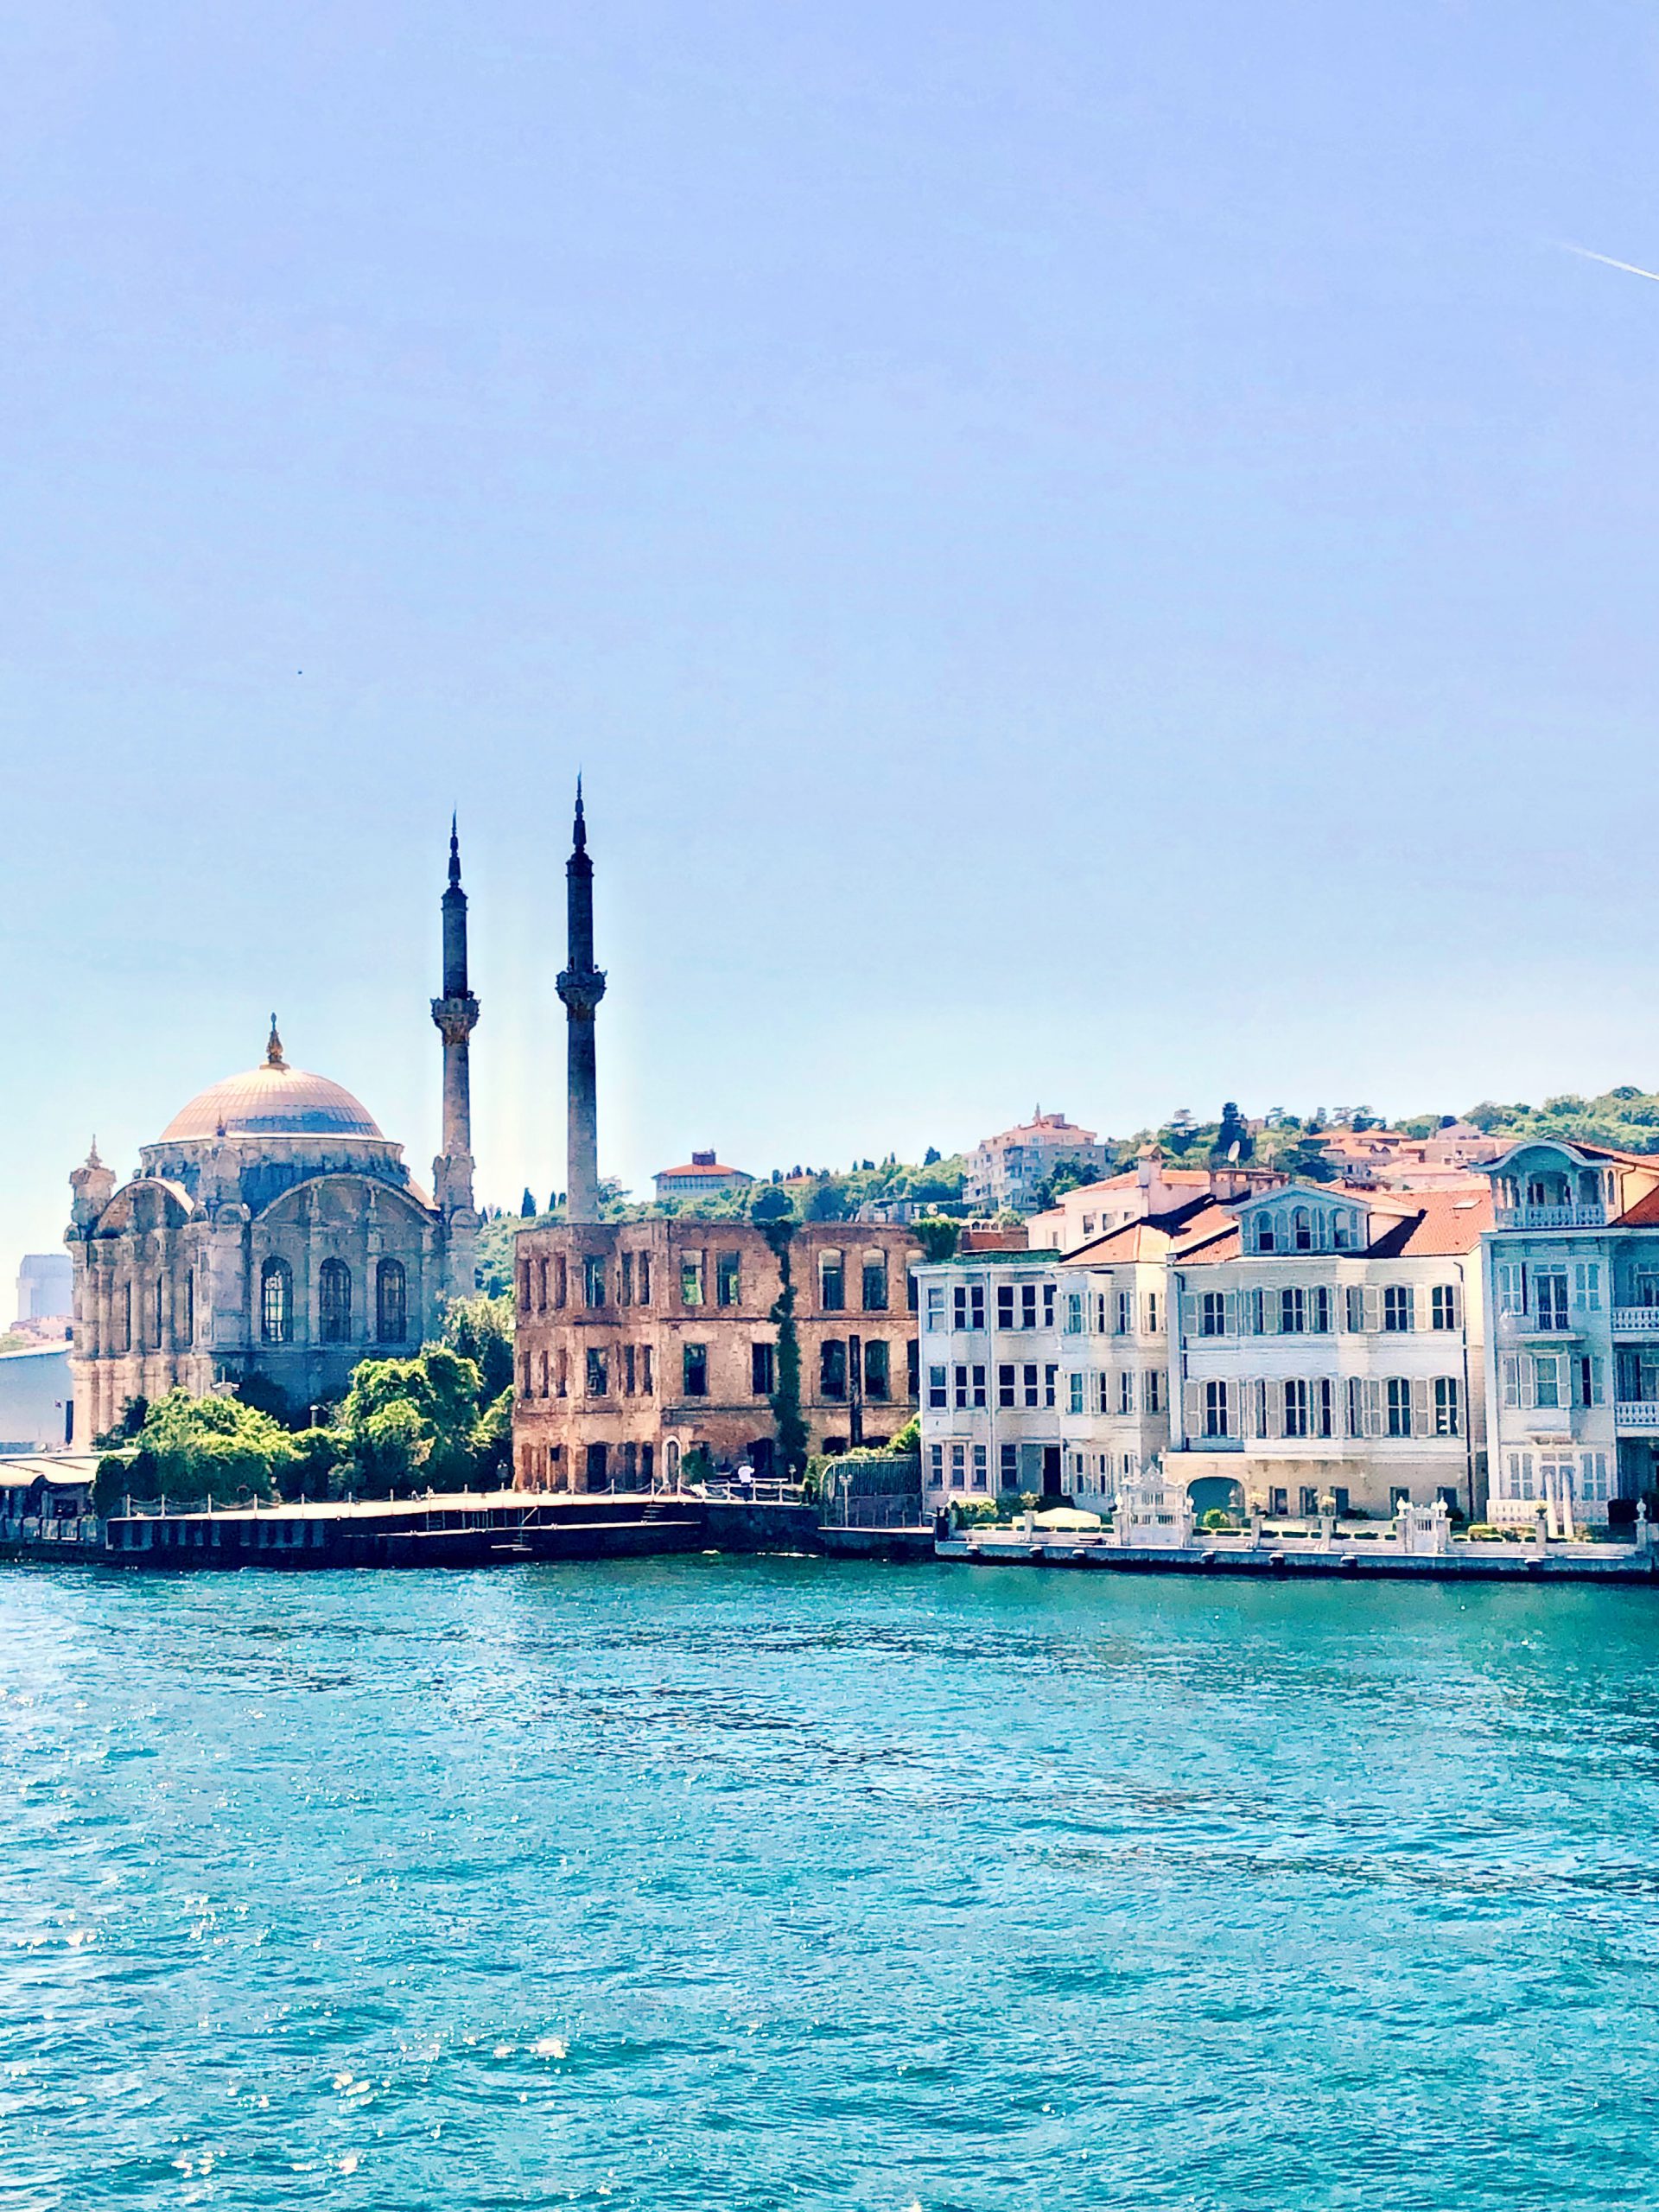 Istanbul Property for Sale: Finest and Elegant Options to Invest In